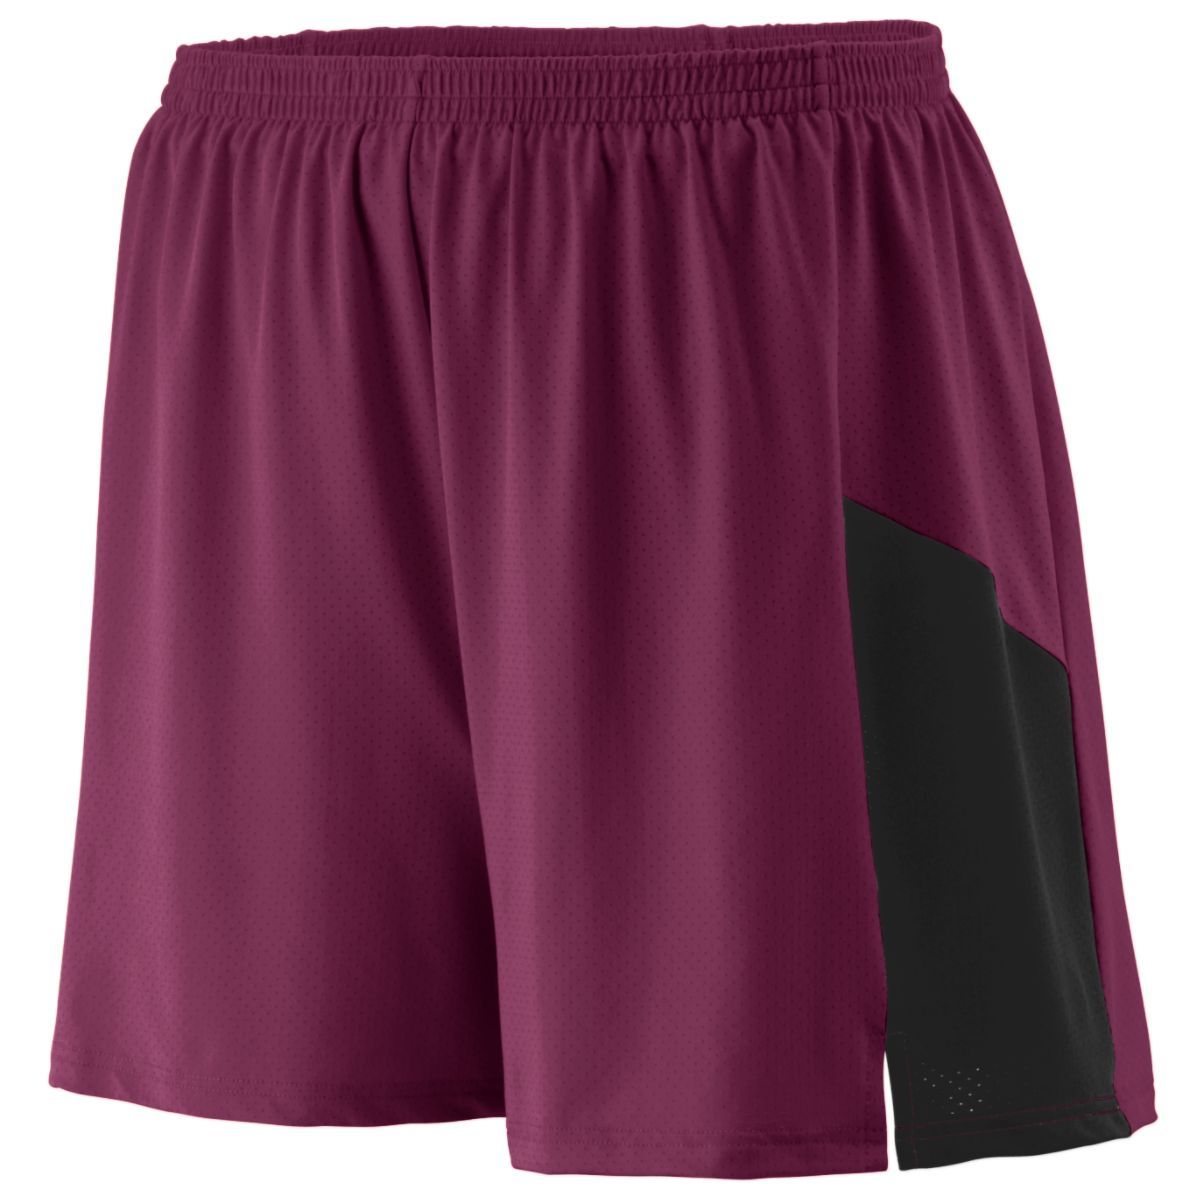 Augusta Sportswear Sprint Shorts in Maroon/Black  -Part of the Adult, Adult-Shorts, Augusta-Products, Track-Field product lines at KanaleyCreations.com